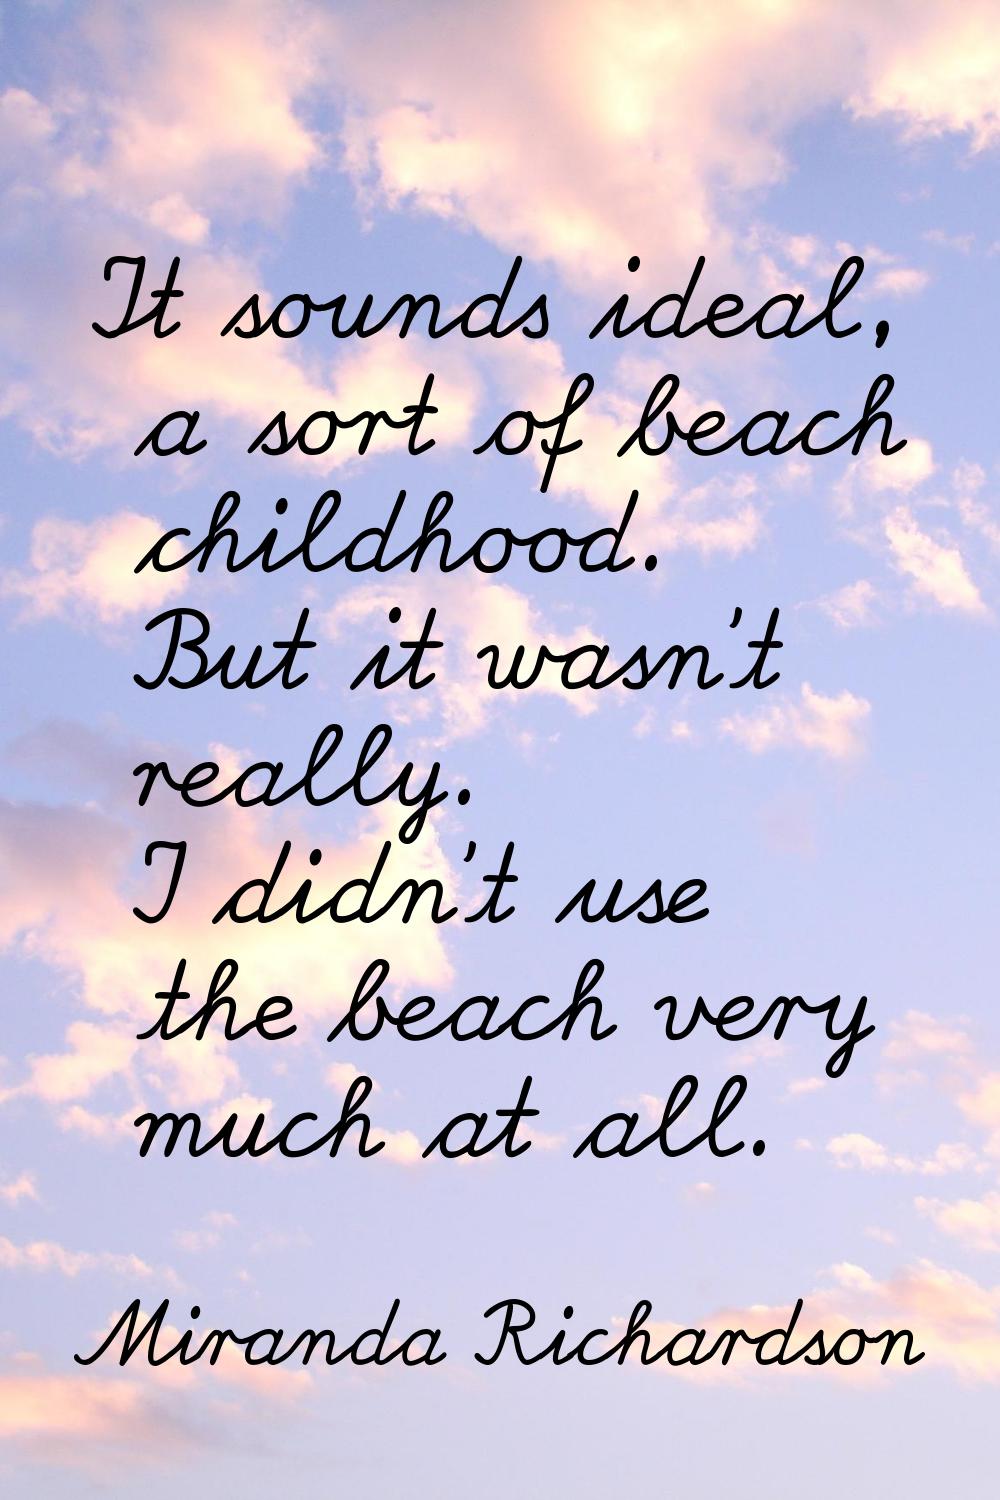 It sounds ideal, a sort of beach childhood. But it wasn't really. I didn't use the beach very much 